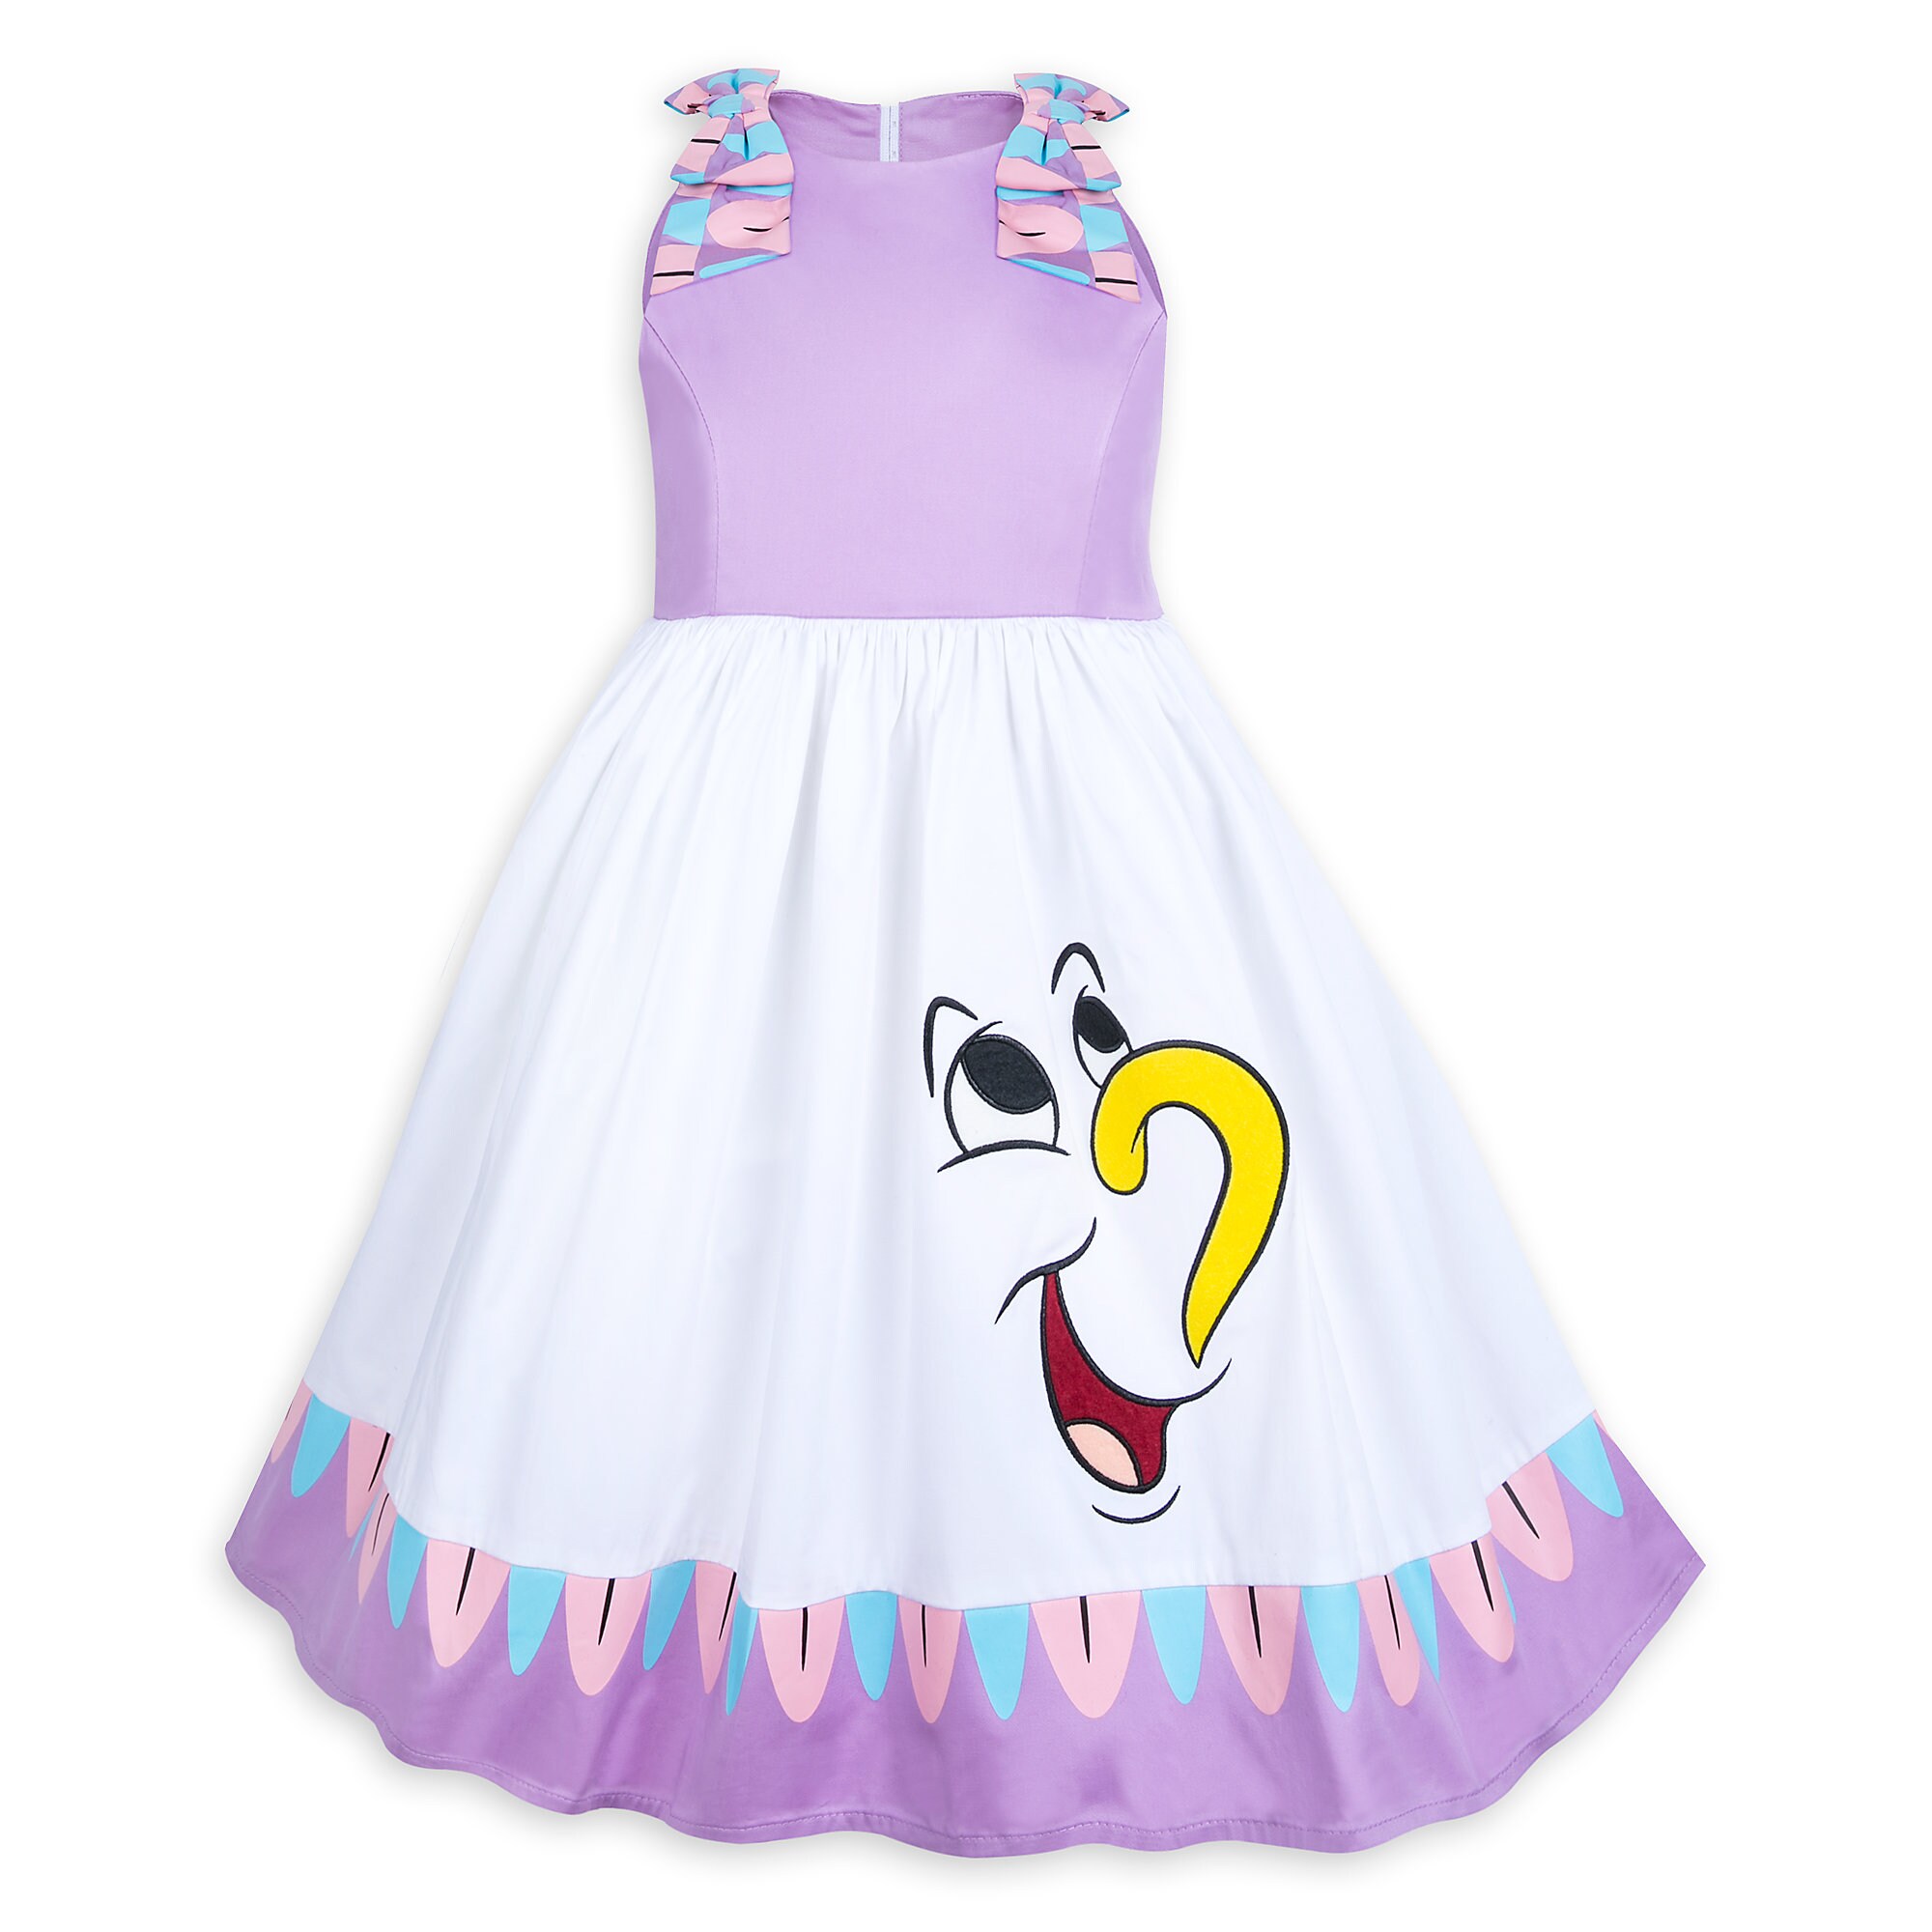 Mrs. Potts and Chip Dress for Girls - Beauty and the Beast